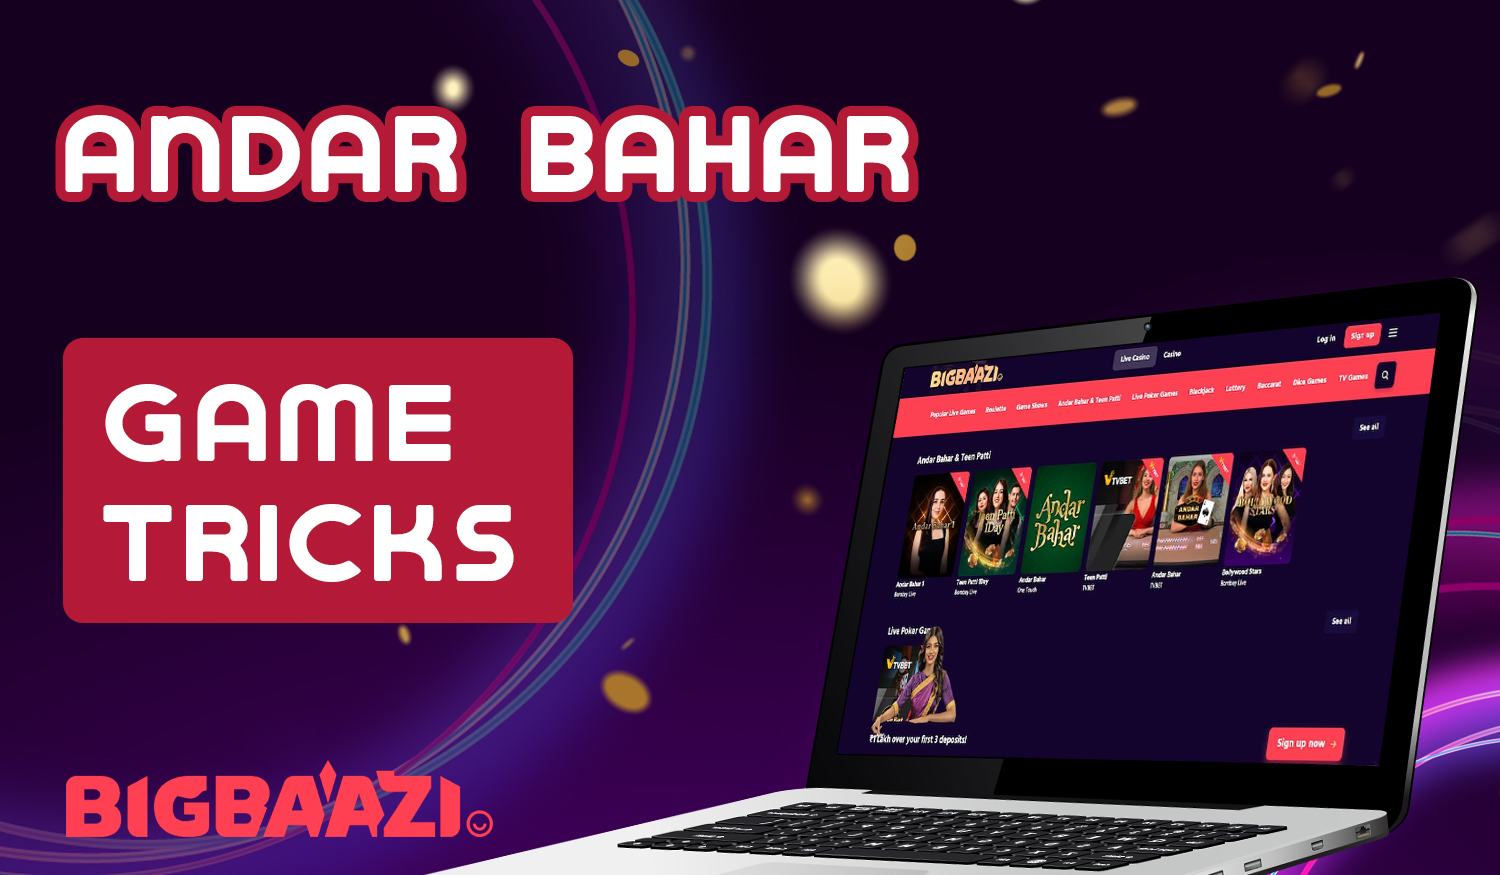 The most popular strategies to successfully play Andar Bahar on Big Baazi